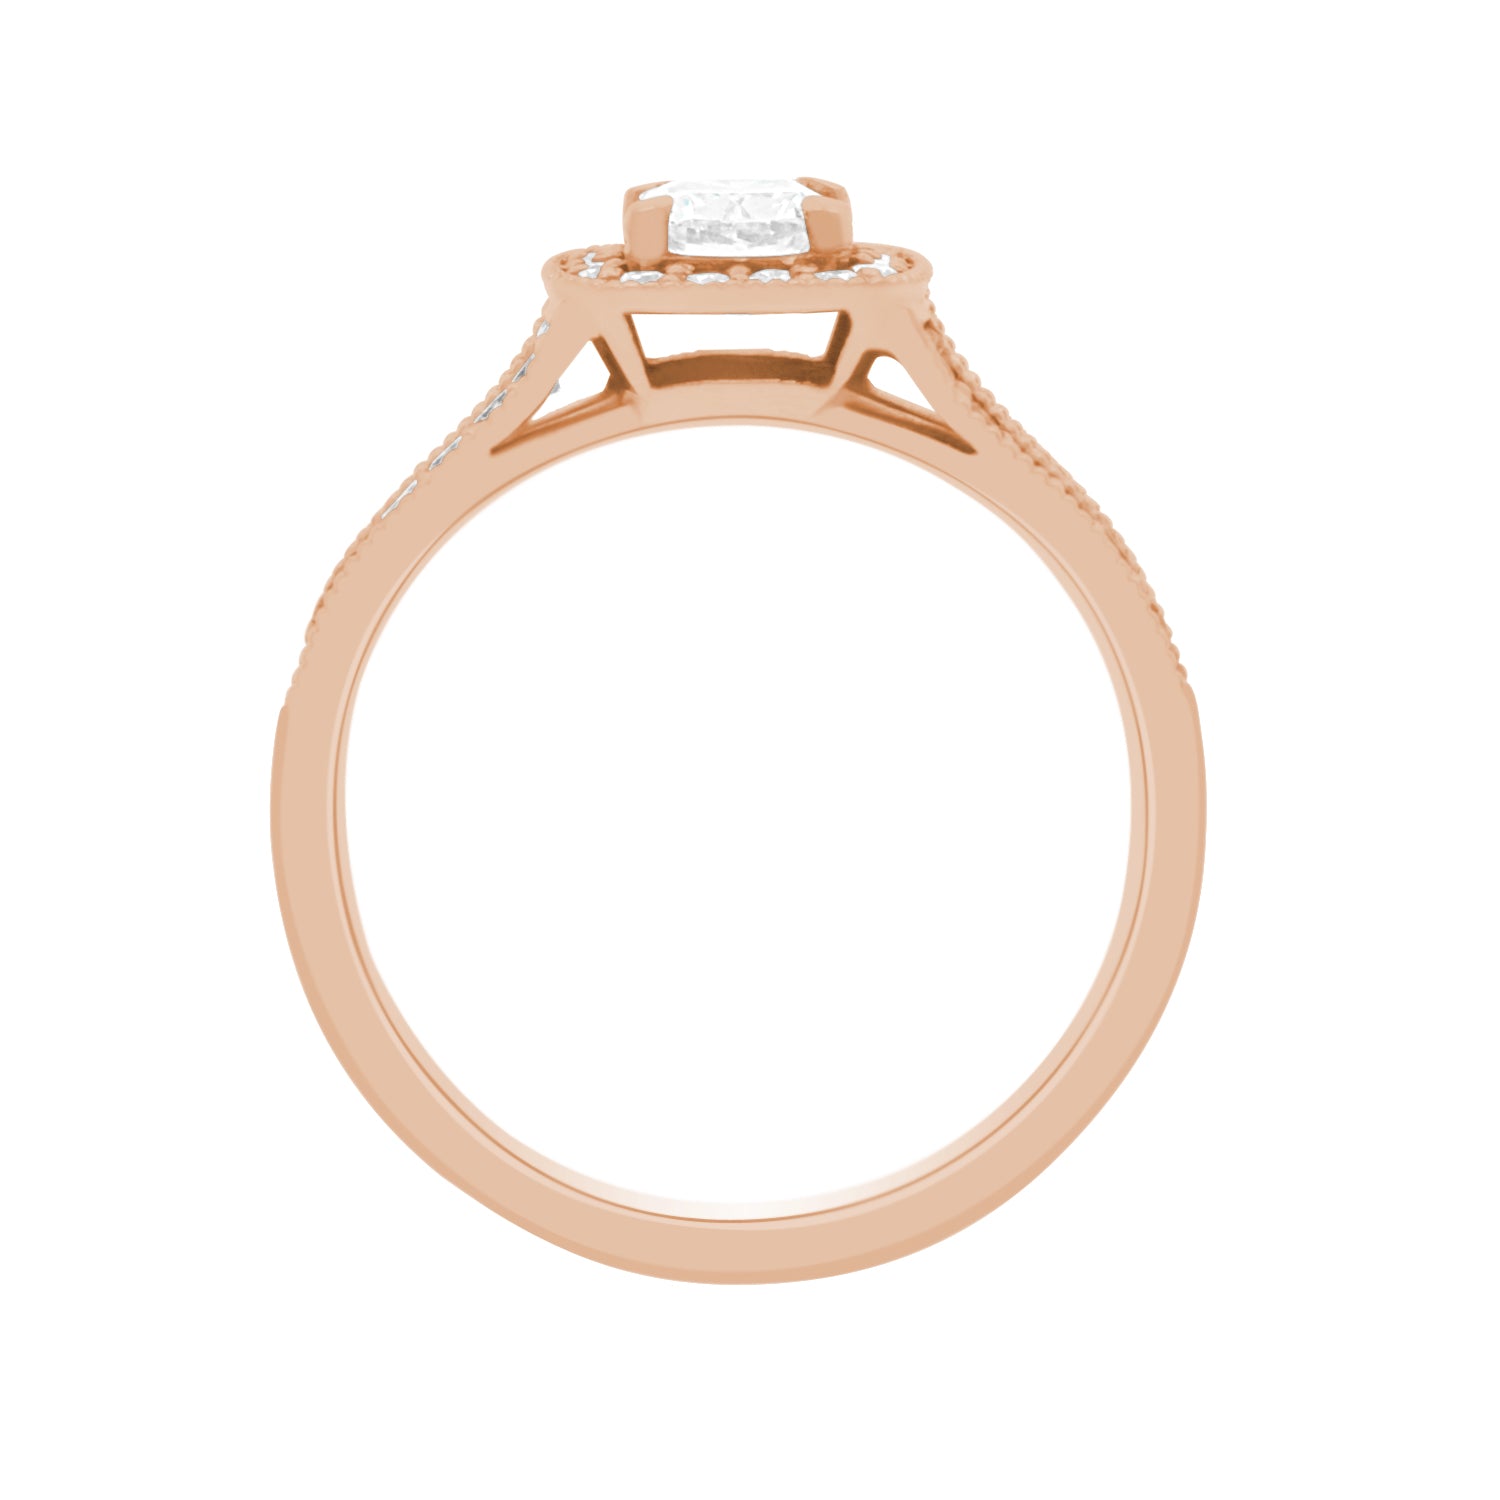 Cushion Halo Diamond Ring in rose gold in an upright position